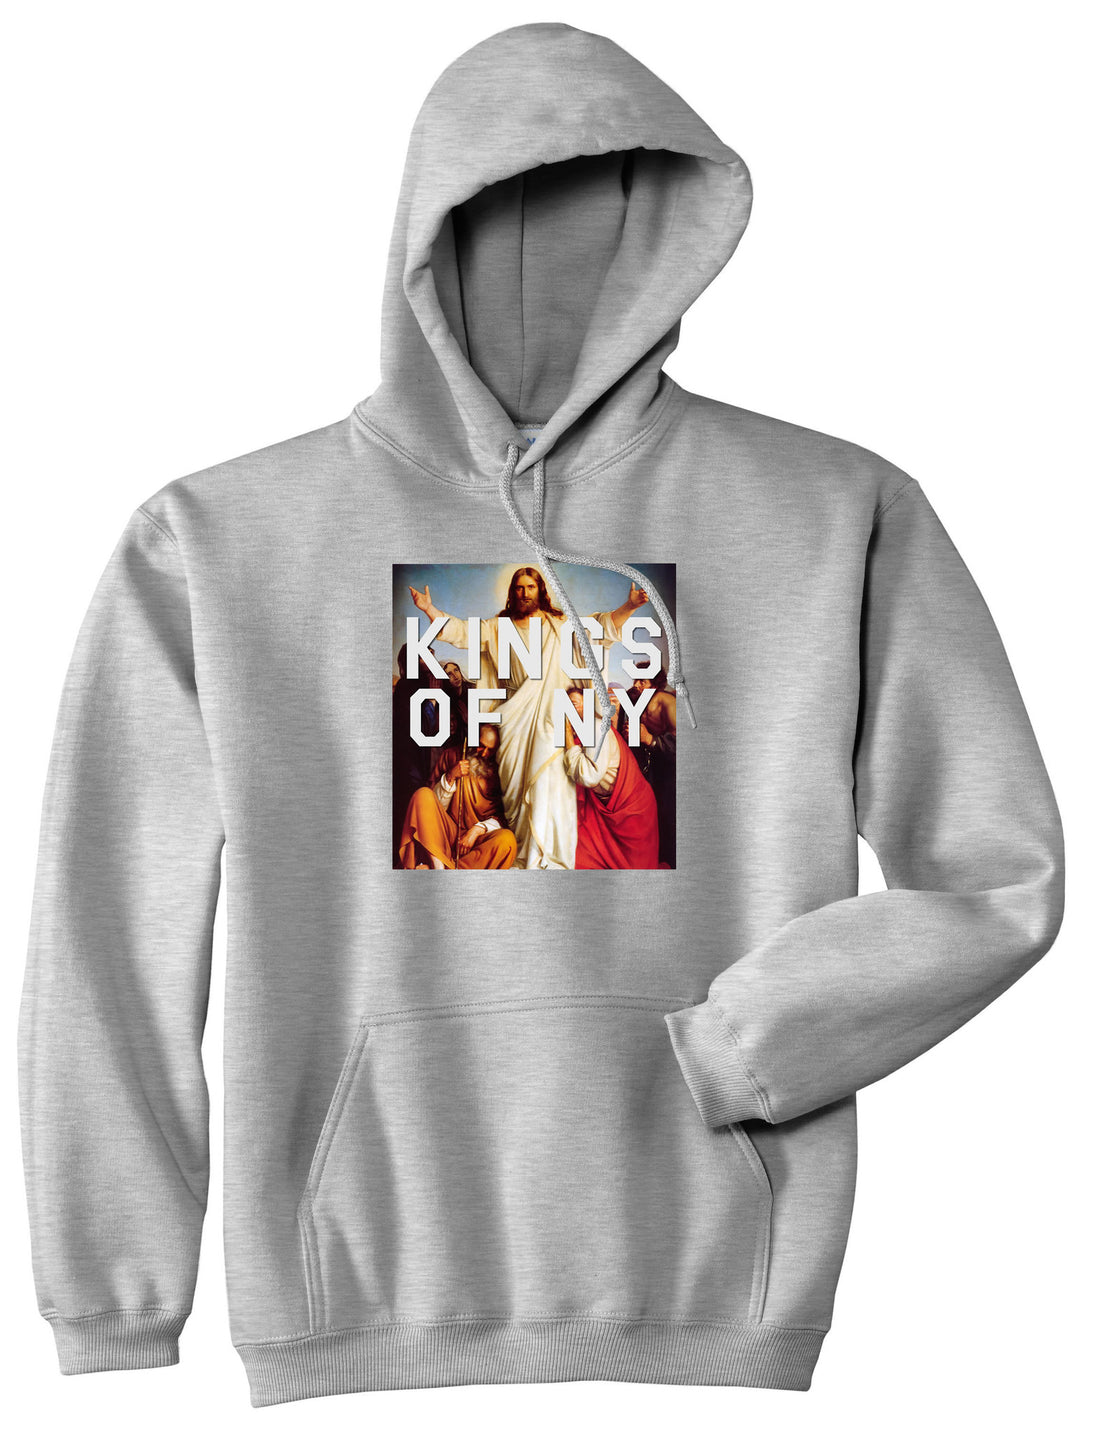 Jesus Worship and Praise of Power Pullover Hoodie in Grey By Kings Of NY